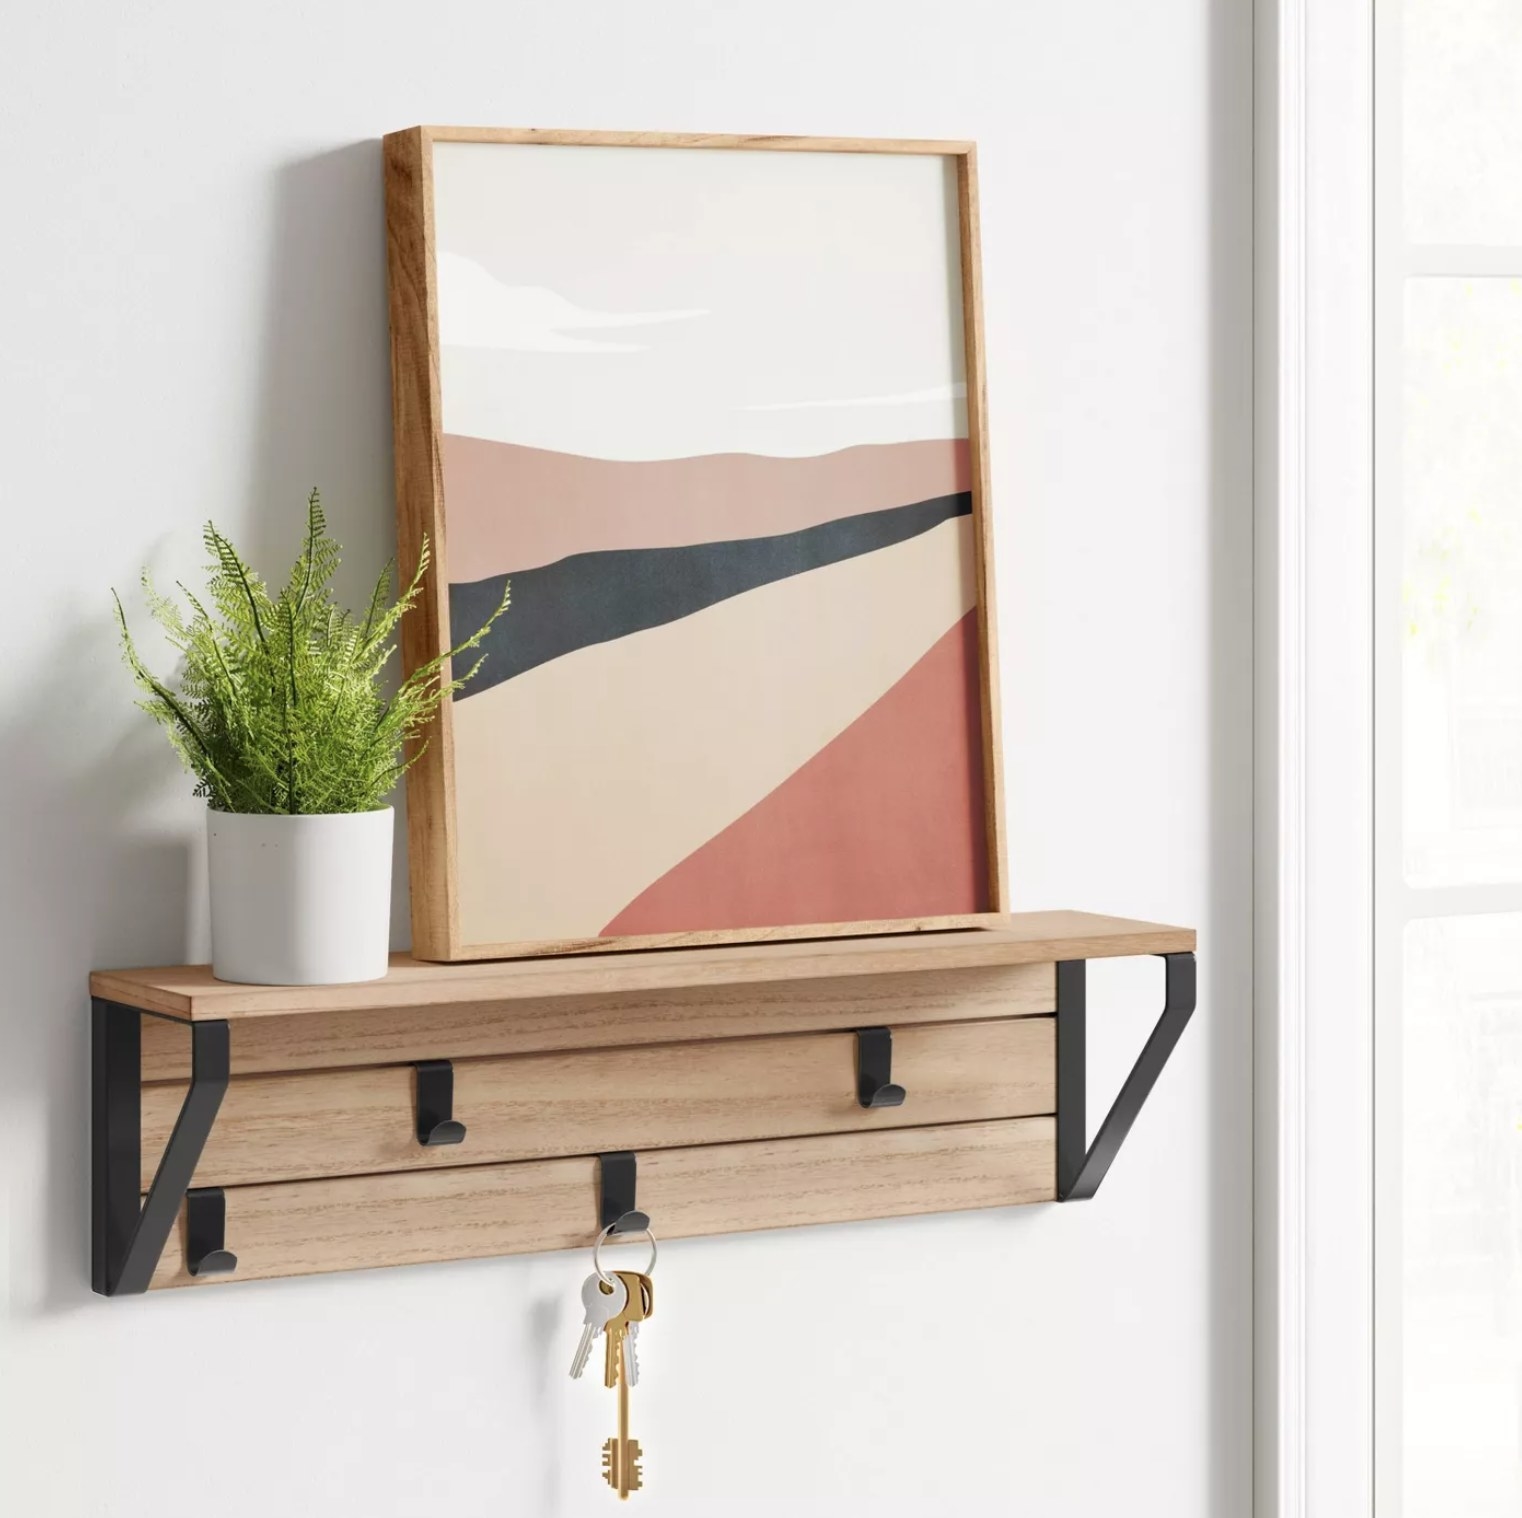 The shelf holding keys, a plant, and a framed picture